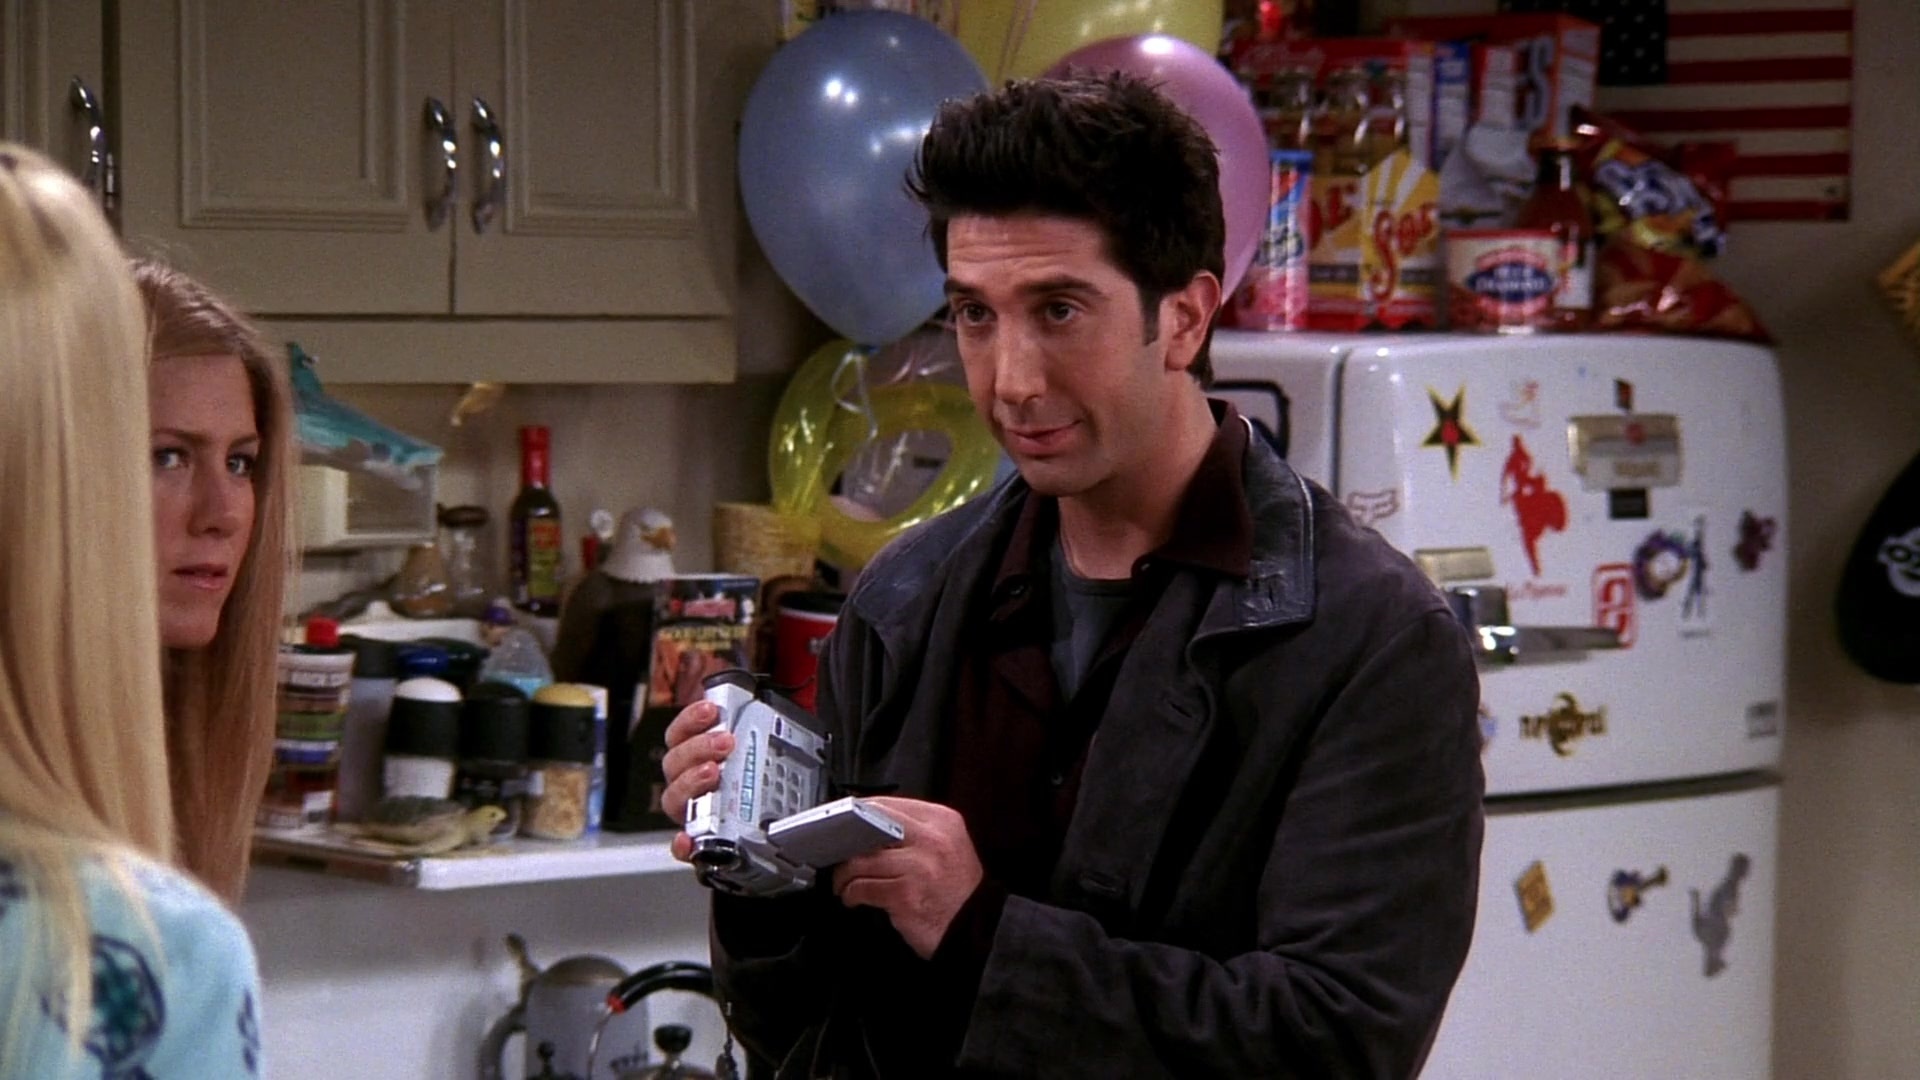 Canon camcorder, Friends season 10, The One with the Cake, TV show prop, 1920x1080 Full HD Desktop